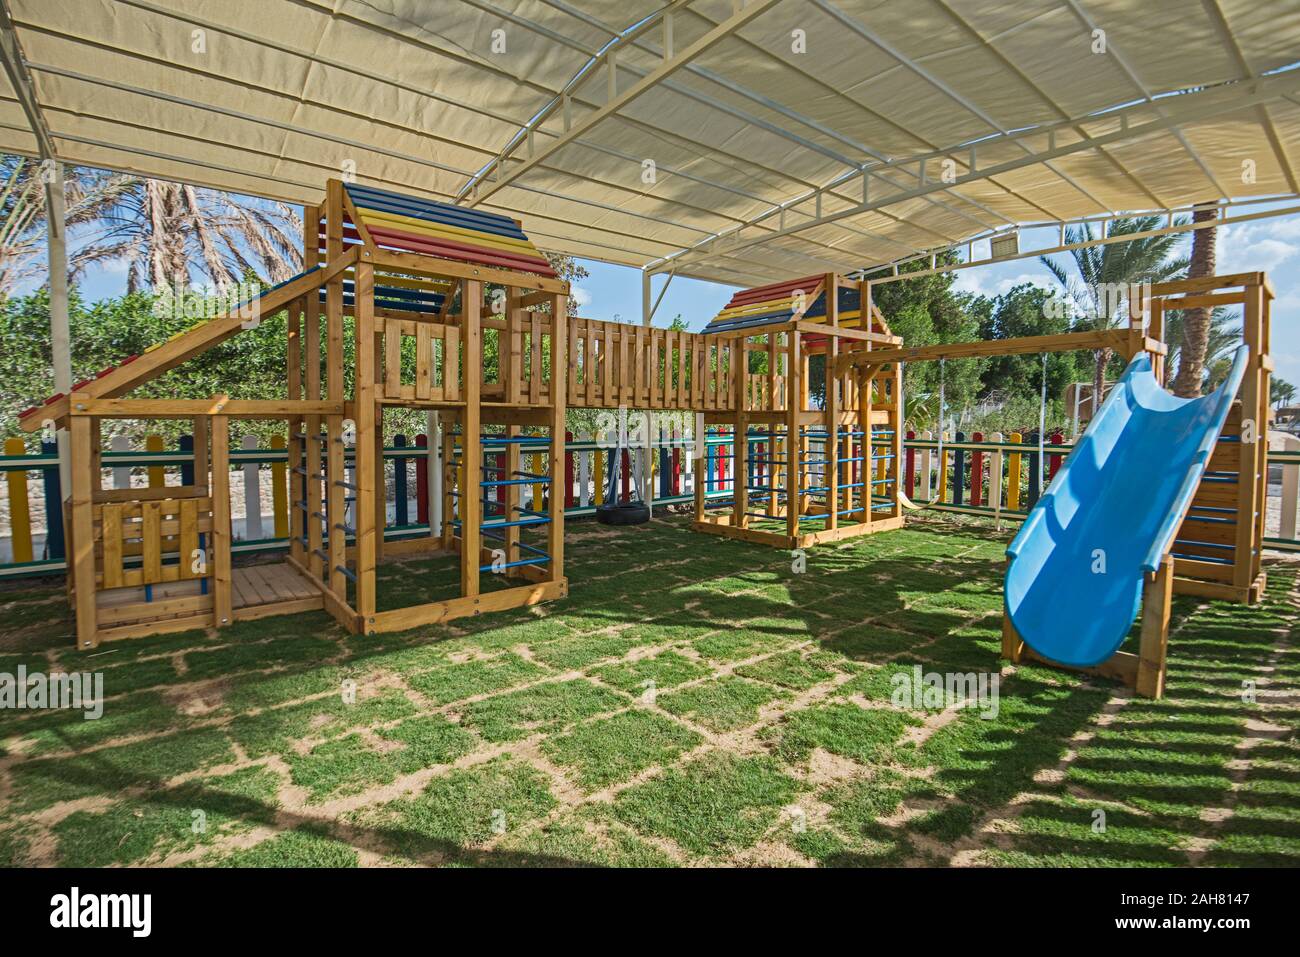 Large wooden climbing frame structure in children's playground area of luxury hotel Stock Photo